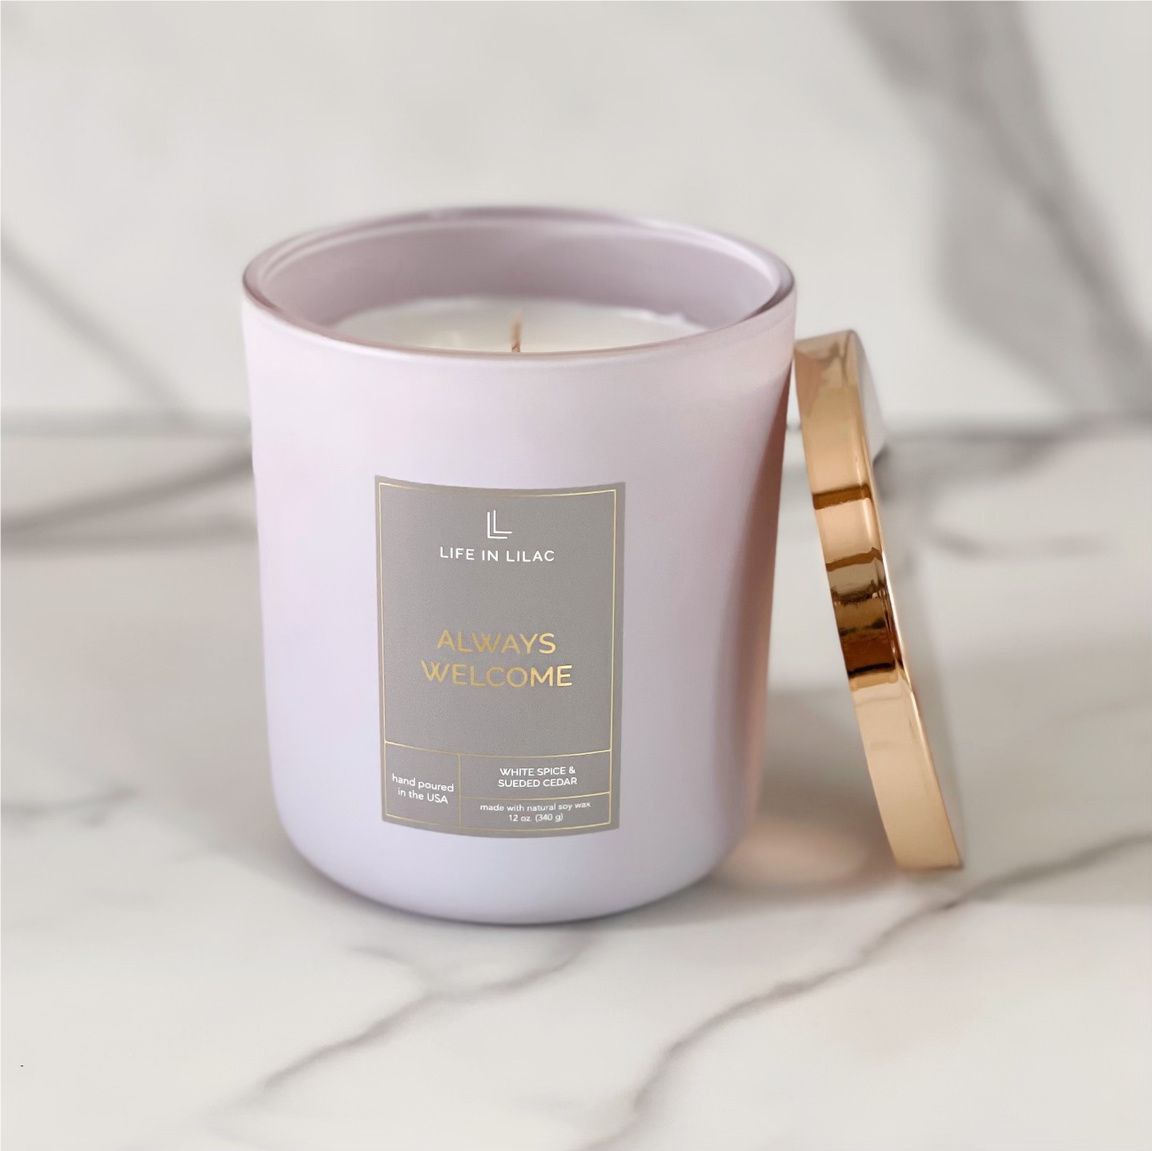 Scented Holiday Candles You’ll Never Want to Stop Burning